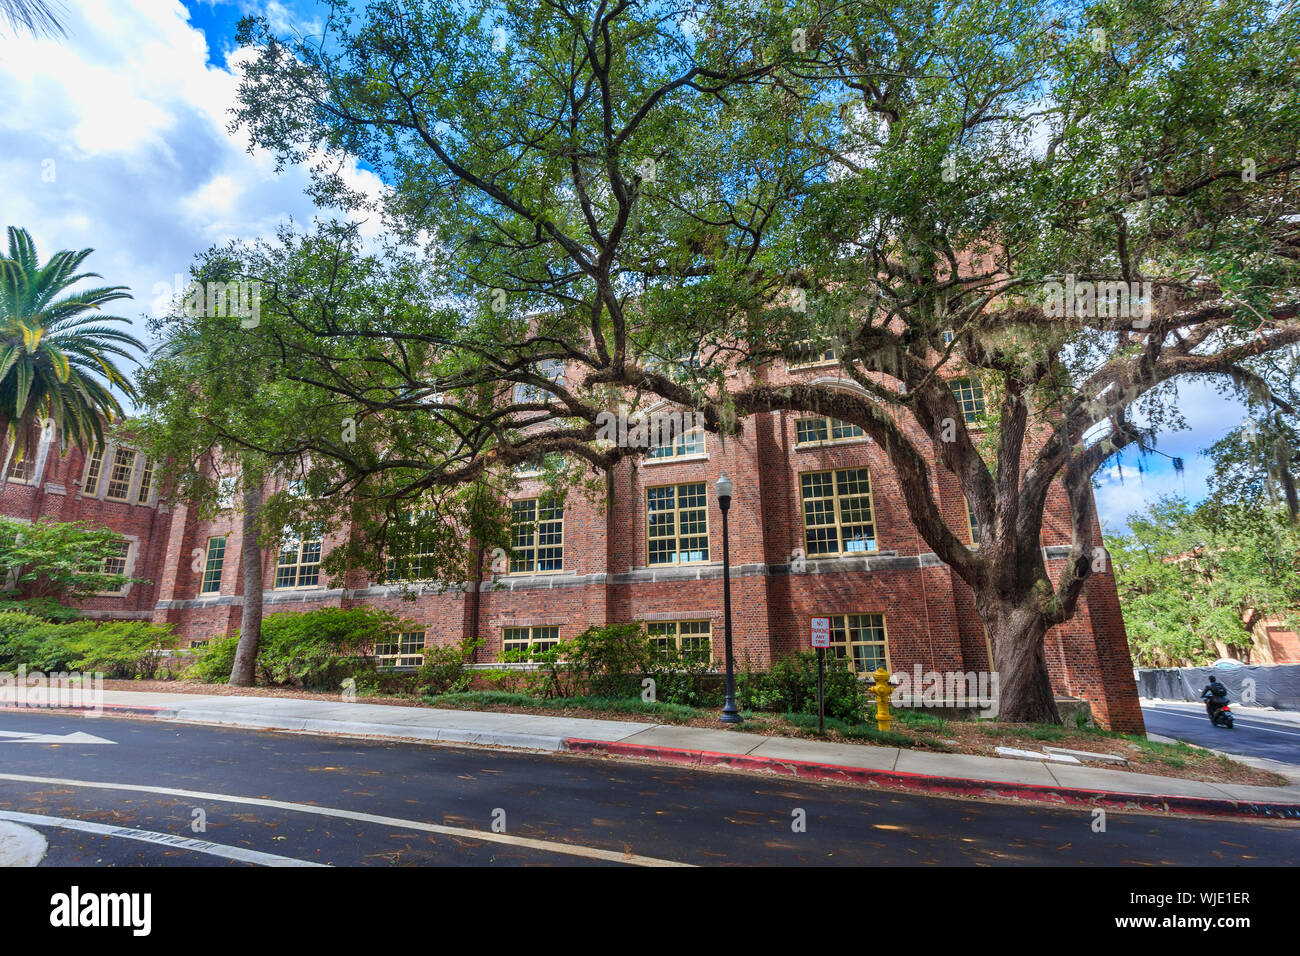 TALLAHASSEE, FL, USA - SEPTEMBER 13: Montgomery Hall, School of Dance on September 13, 2016 at Florida State University in Tallahassee, Florida. Stock Photo